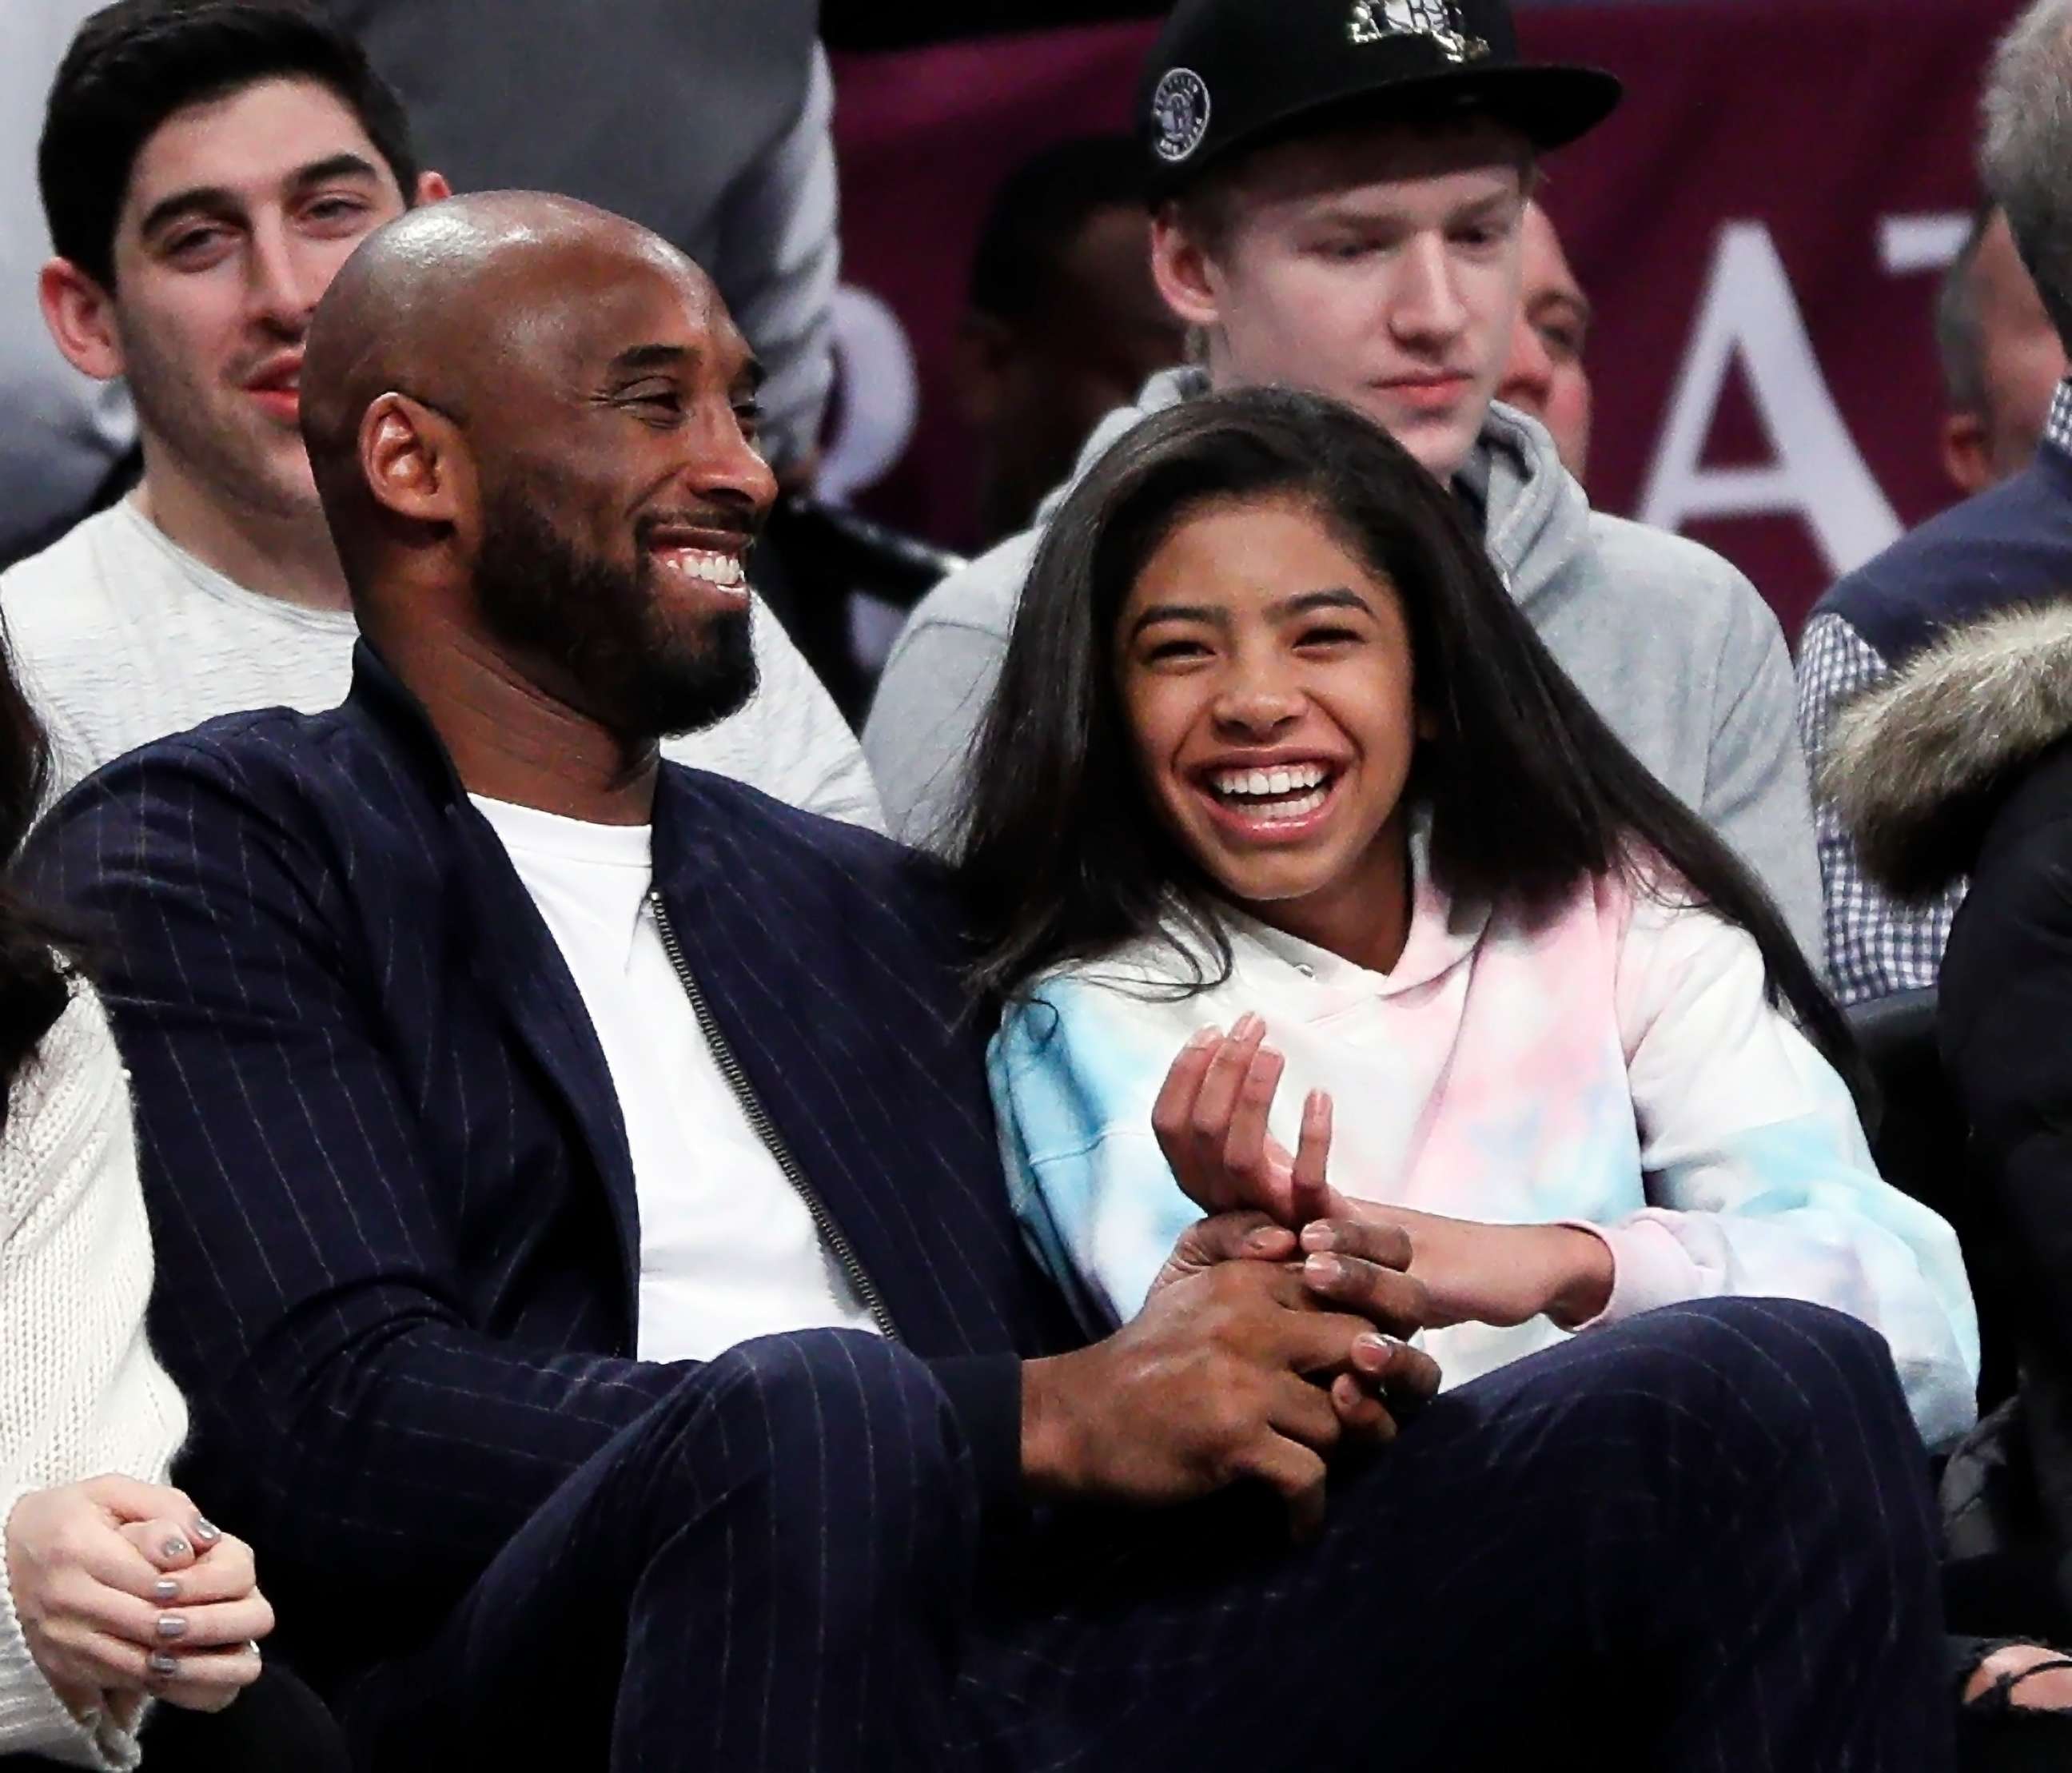 PHOTO: In this file photo, Kobe Bryant and his daughter Gigi watch an NBA basketball game between the Brooklyn Nets and Atlanta Hawks at Barclays Center in the Brooklyn borough of New York City, Dec. 21, 2019.